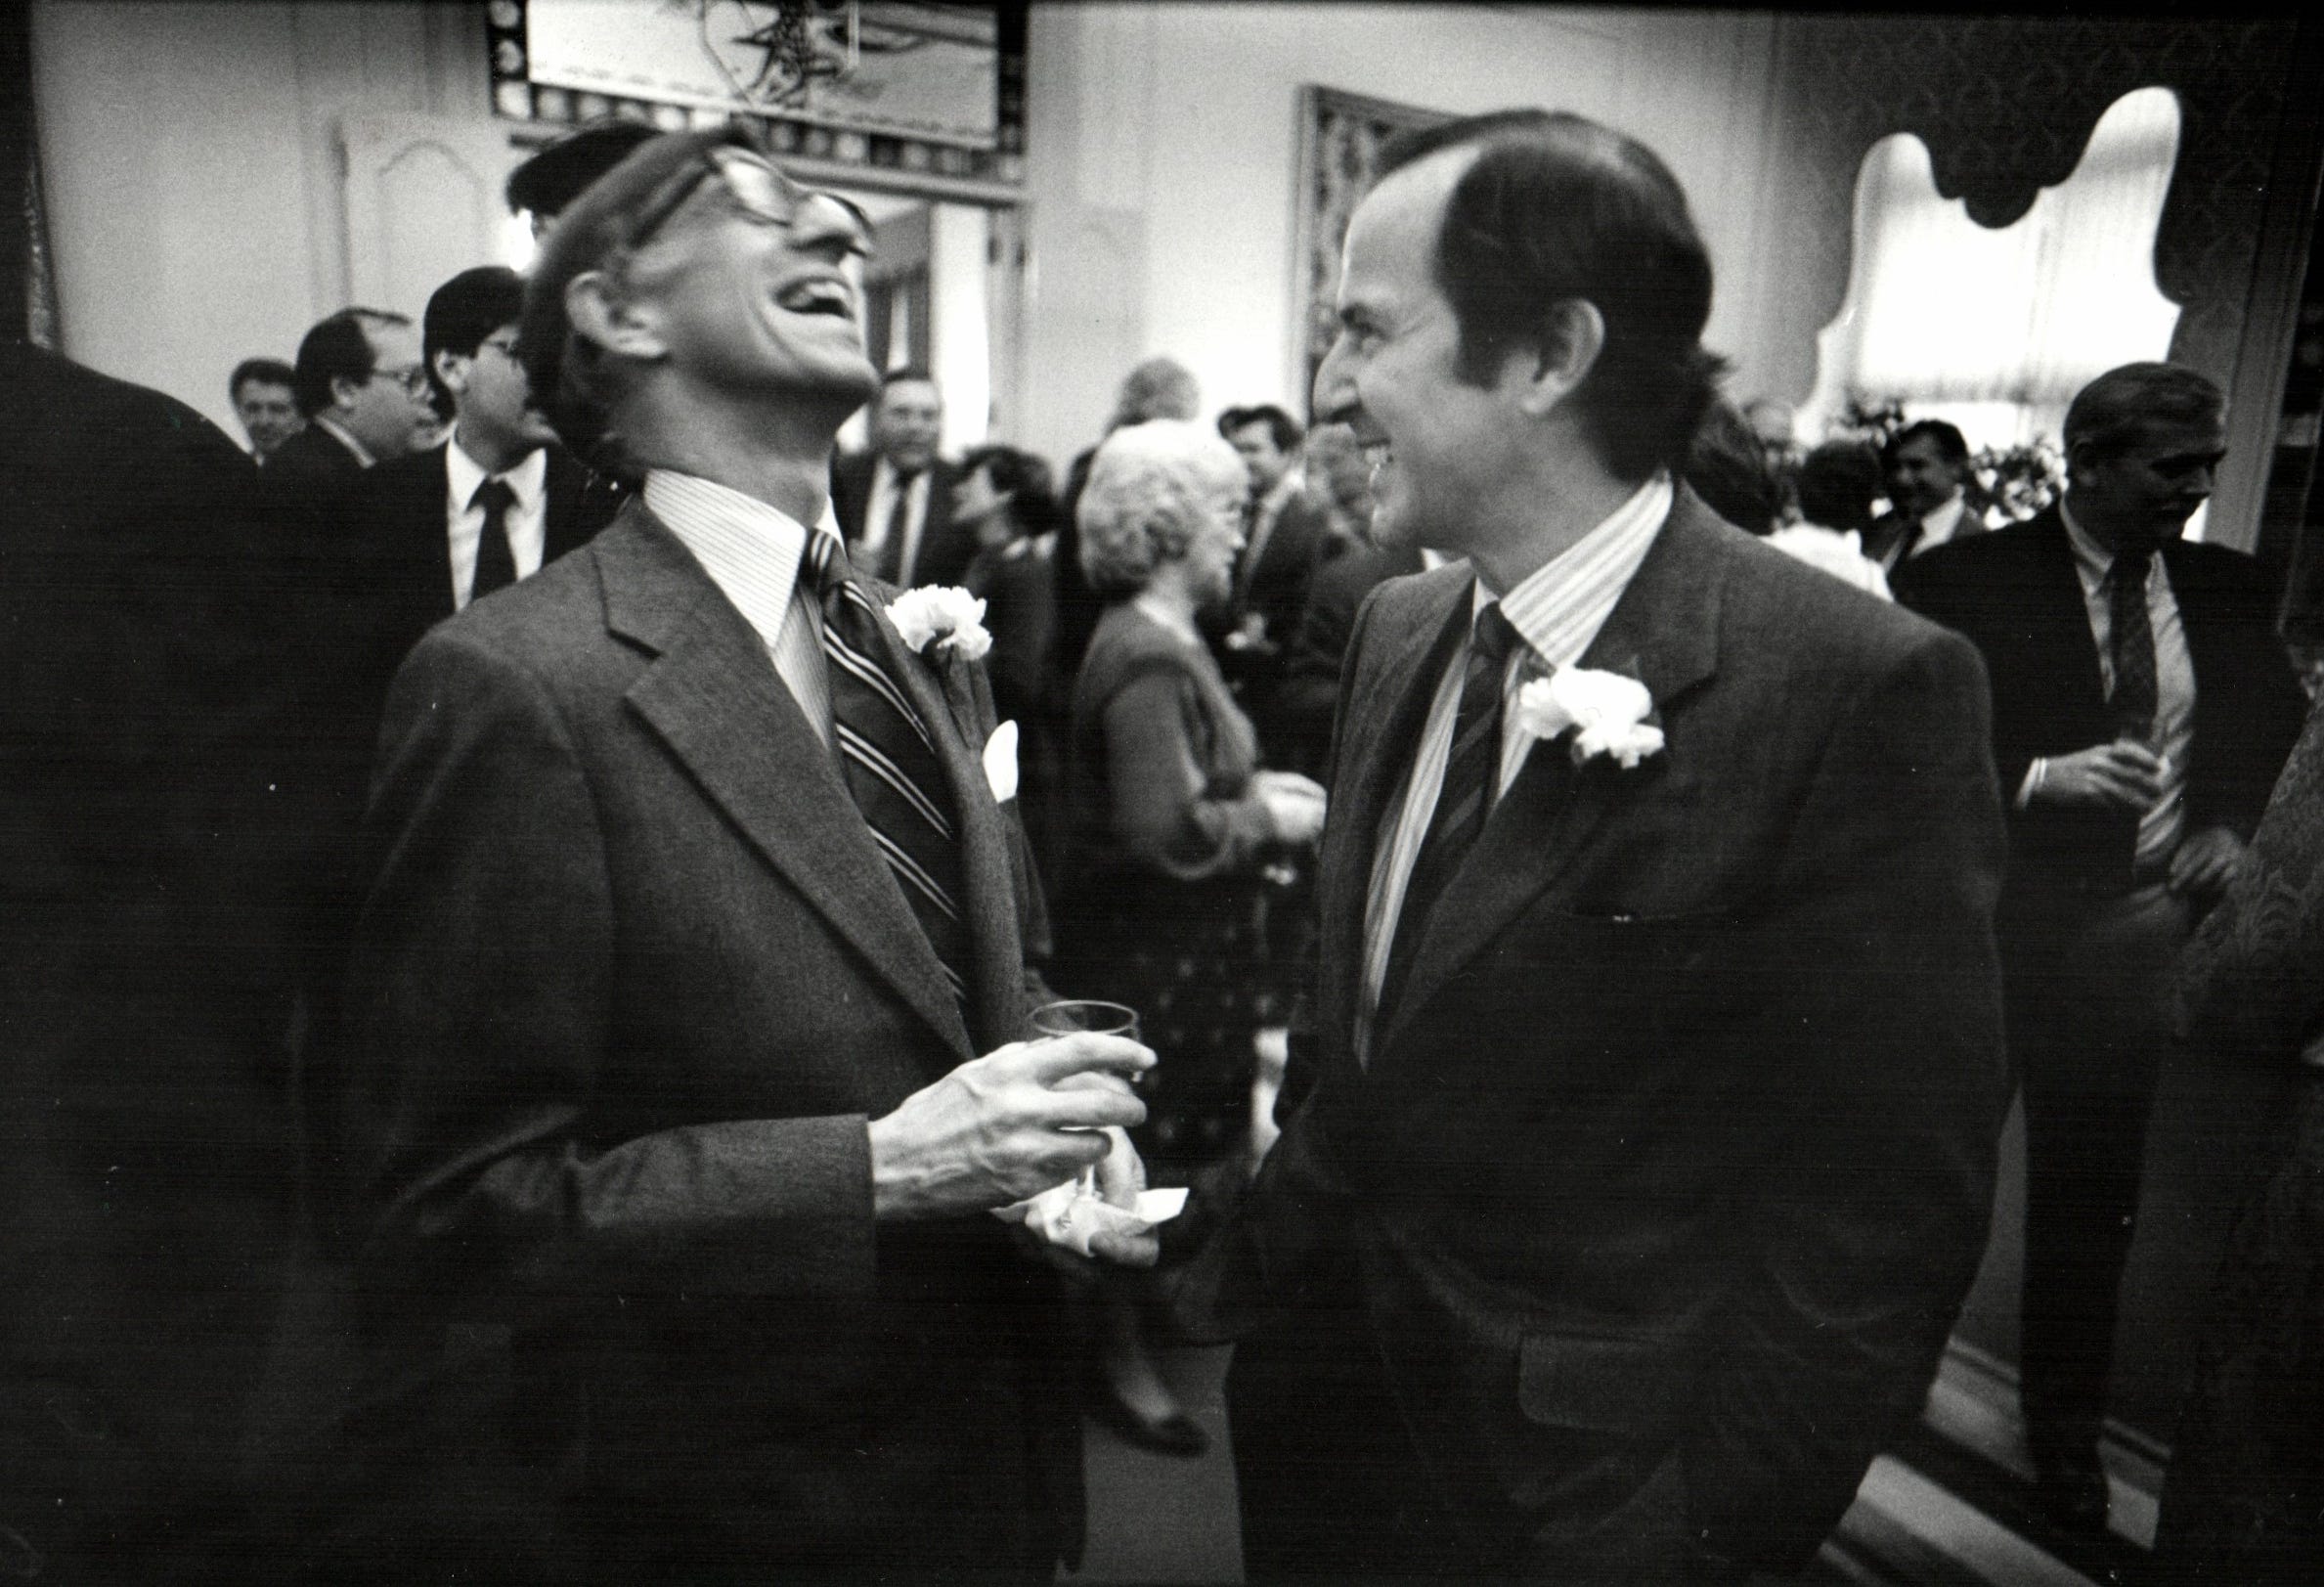 U.S. News & World Report reporter Nicholas Daniloff came to Detroit on Wednesday, Oct. 15, 1986, to speak at the Detroit Athletic Club about his adventures in a Soviet prison. He is shown with U.S. News & World Report Publisher Mortimer Zuckerman, right. Daniloff, who had been stationed in Moscow, was accused of being a spy. He was held for 30 days and then swapped by the United States for an alleged Soviet spy working at the United Nations. Daniloff, 51, lived in Grosse Pointe Farms and went to Kerby Elementary School from 1943 to 1946.